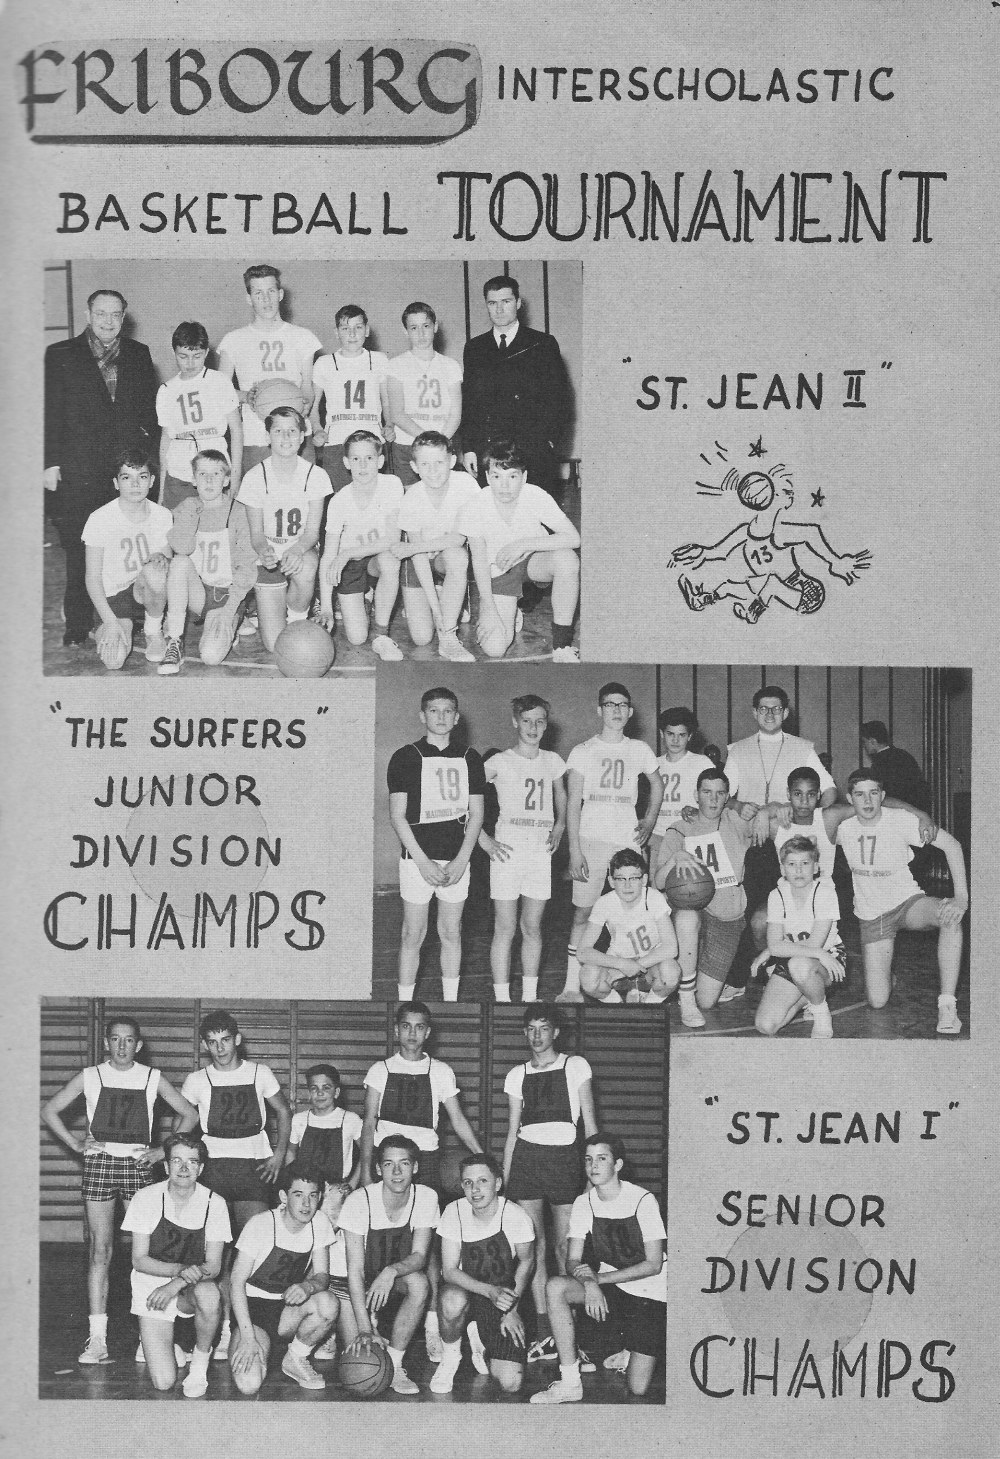  SPORTS Basketball 4 for for Villa Saint Jean International School  1964 Yearbook Le Chamois